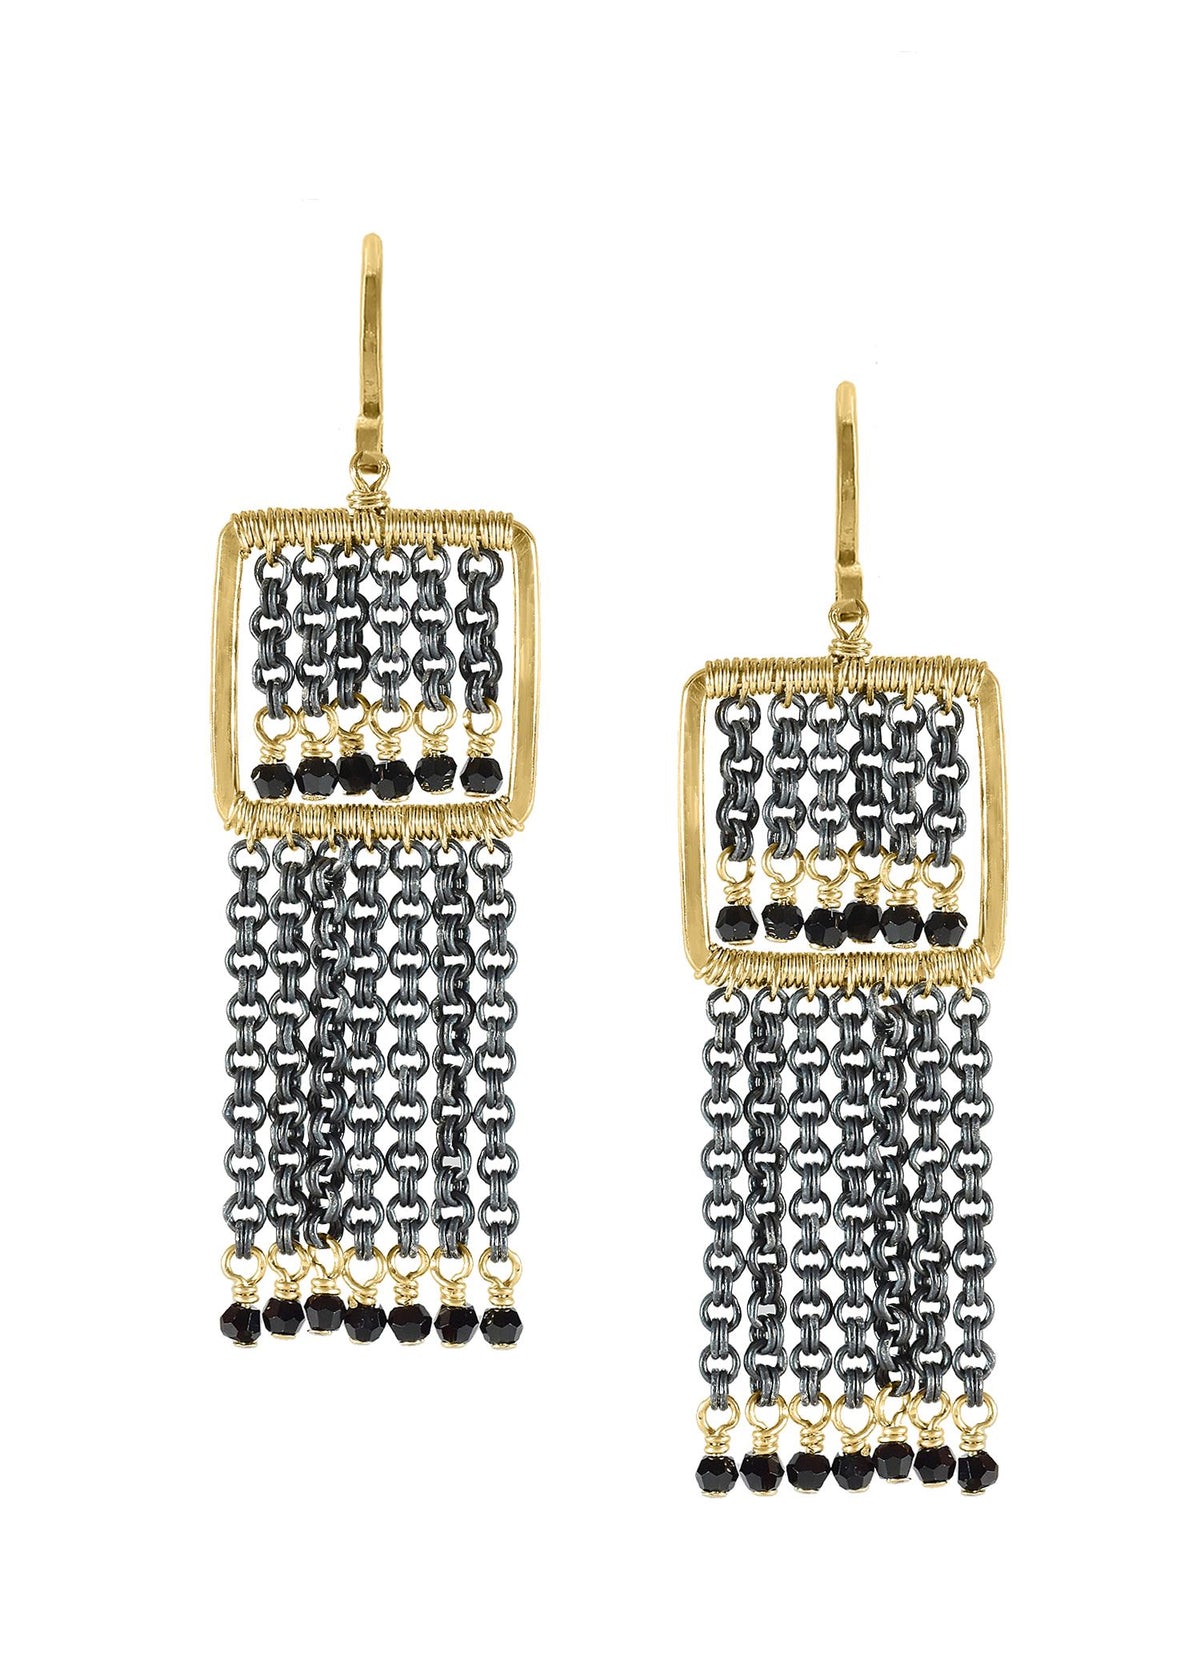 Crystal 14k gold fill Blackened sterling silver Mixed metal Earrings measure 1-3/4&quot; in length (including the ear wires) and 9/16&quot; in width Handmade in our Los Angeles studio